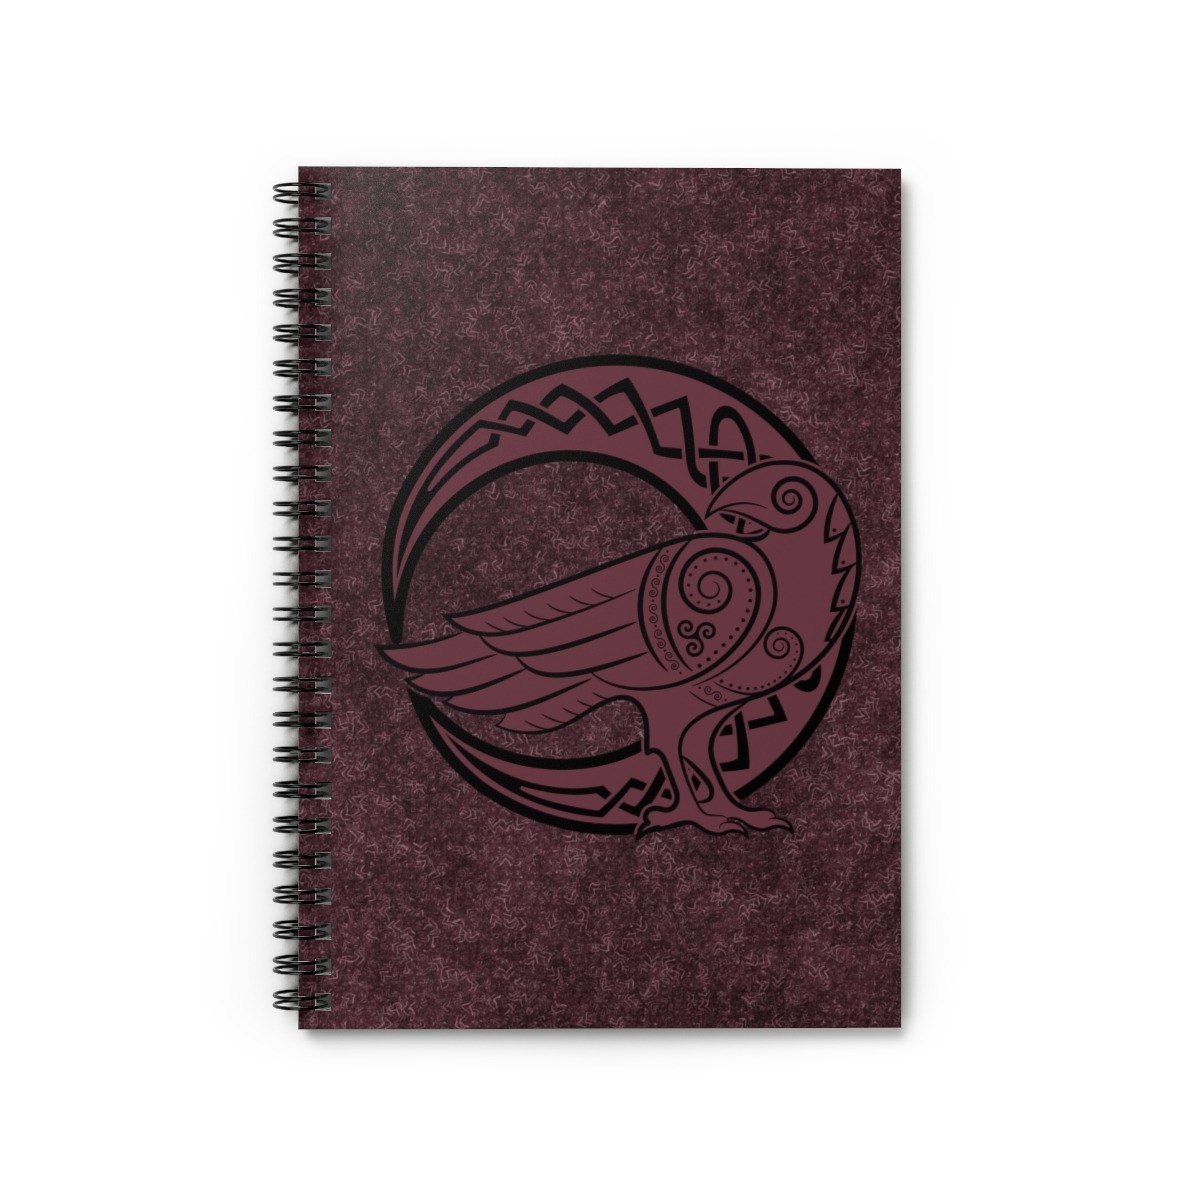 Maroon Raven Crescent Moon Ruled Line Spiral Notebook